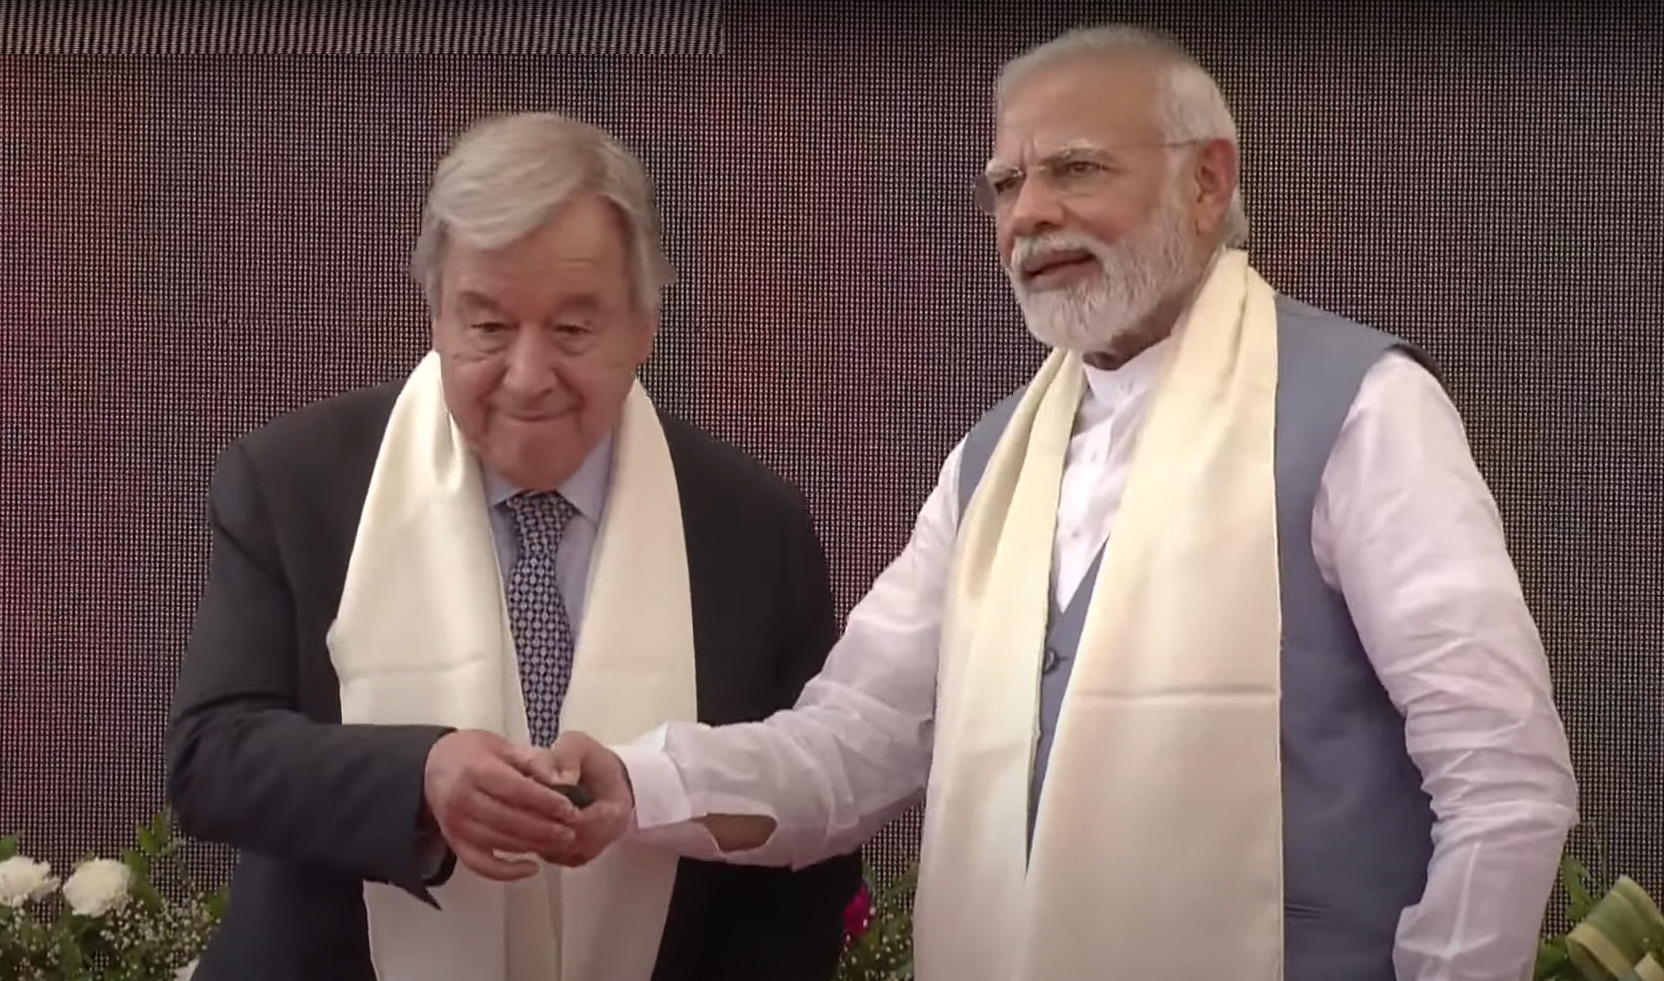 PM launches Mission LiFE at Statue of Unity in presence of UN Secretary-General Antonio Guterres